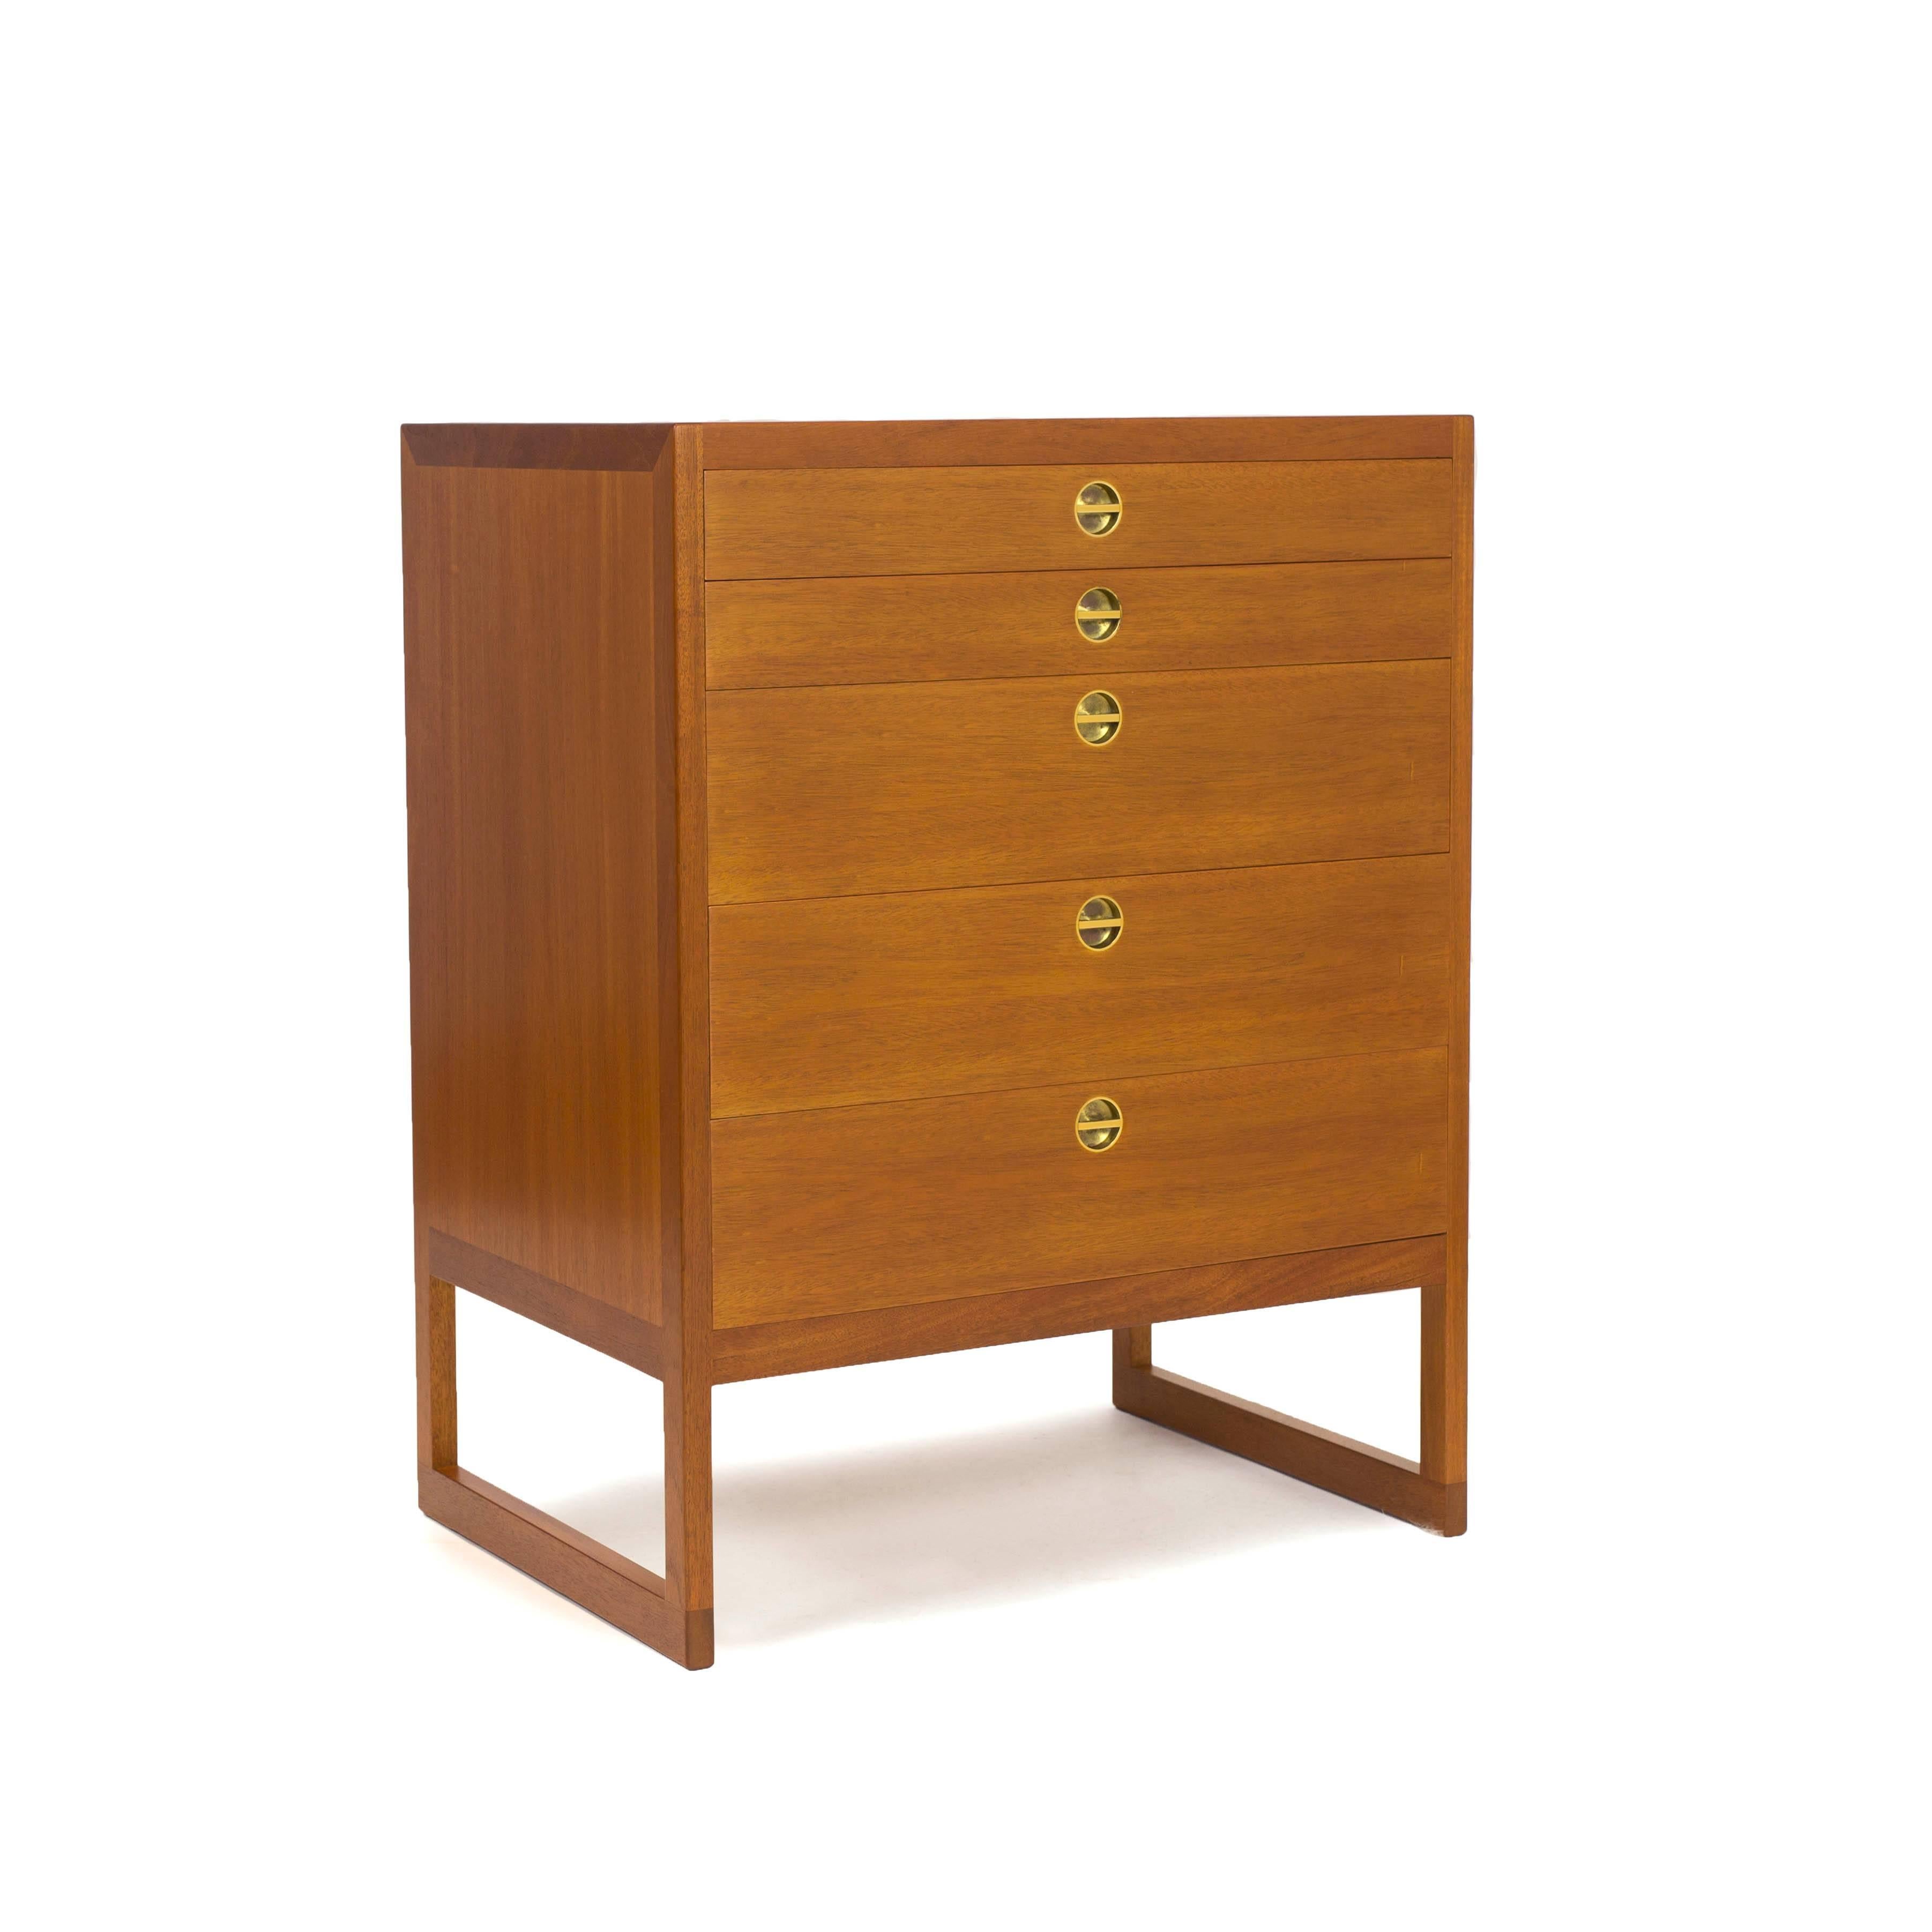 A Børge Mogensen mahogany chest of five drawers with brass handles. 

Designed by Børge Mogensen 1957, manufactured by cabinetmaker P. Lauritsen & Son, Denmark. 

Fine condition.